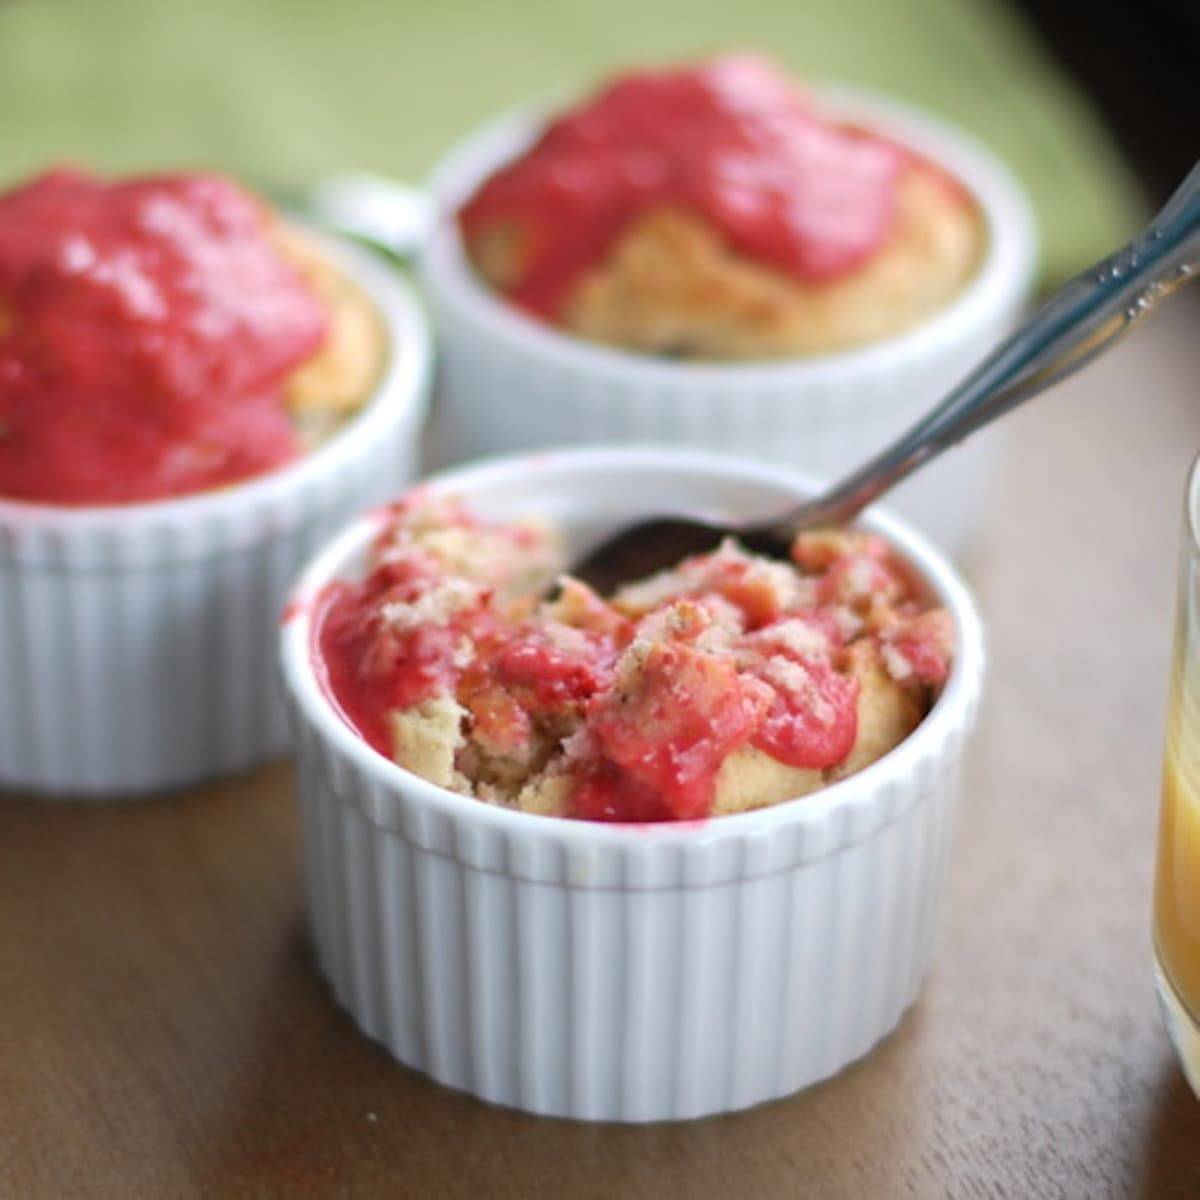 Strawberry breakfast cakes with strawberry sauce on top.